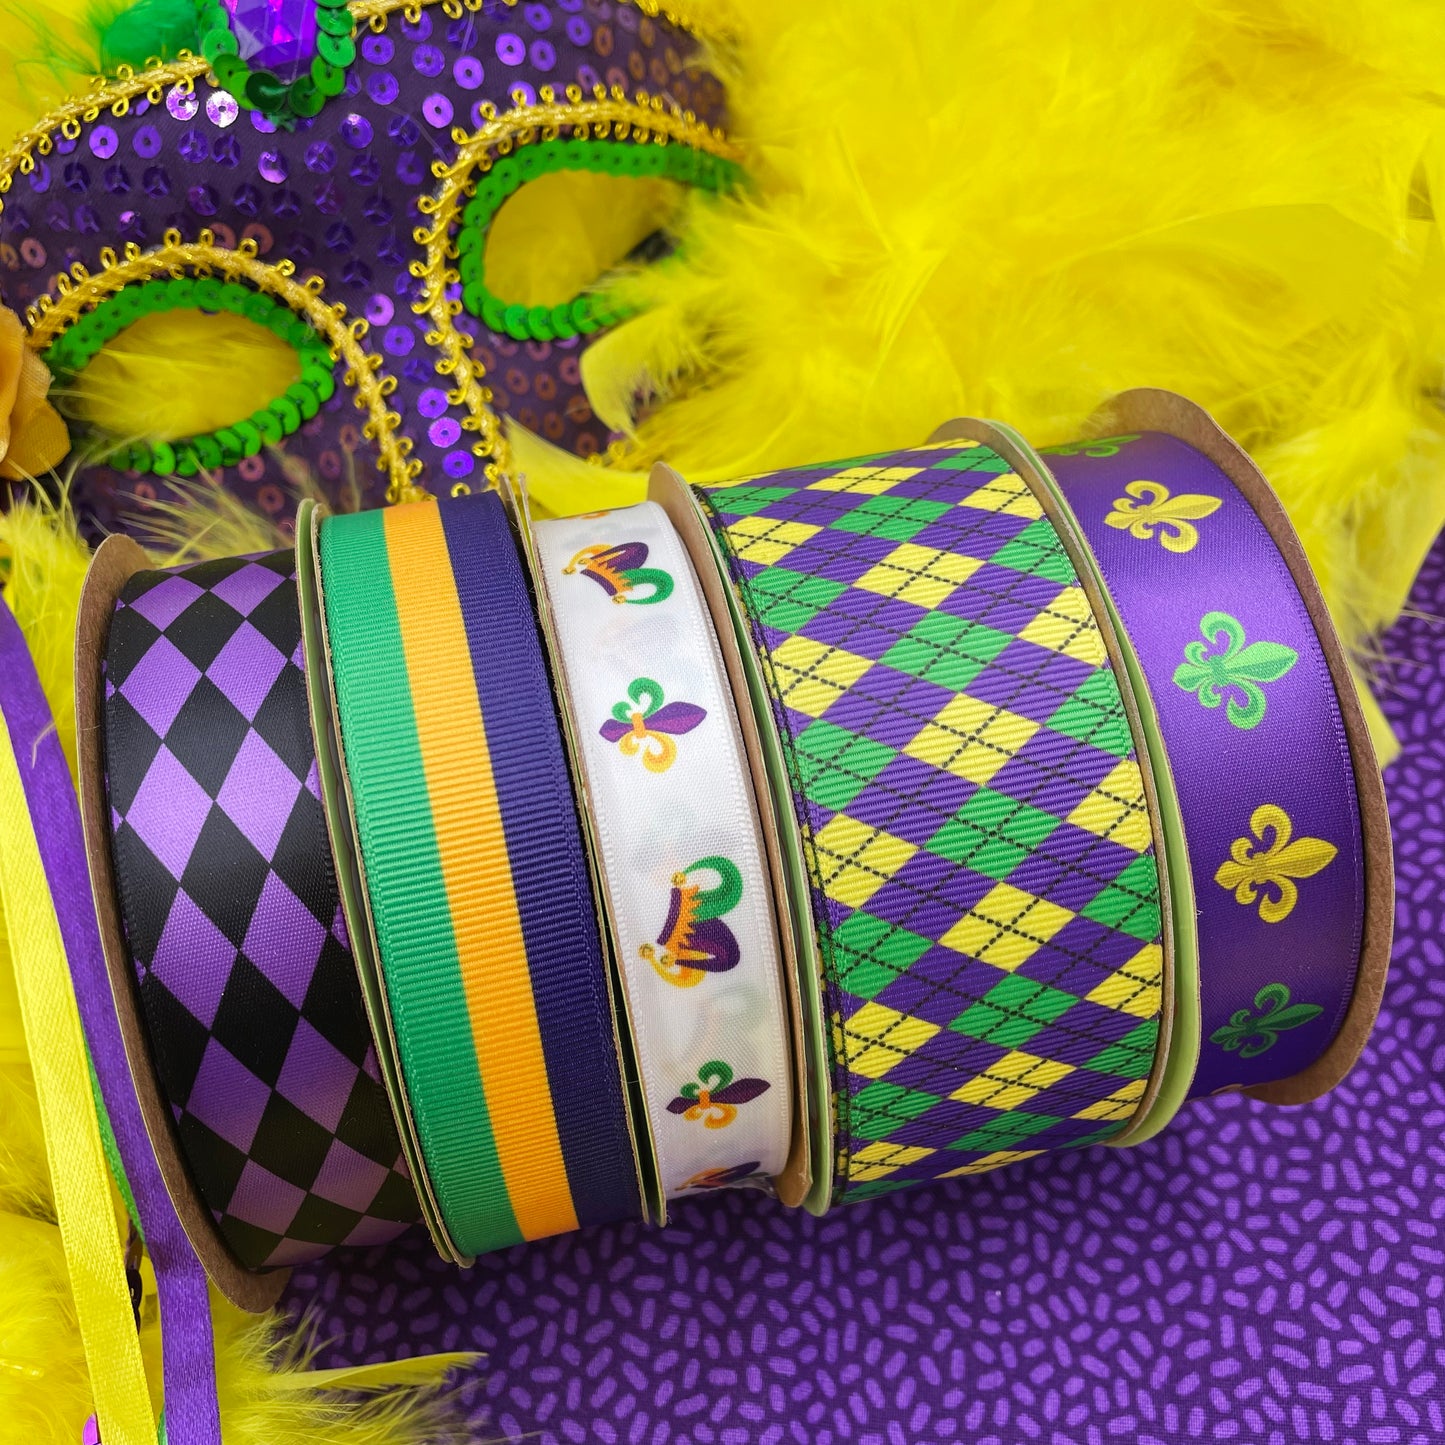 Mardi Gras argyle ribbon in purple green and yellow printed on 1.5" white single face satin and grosgrain